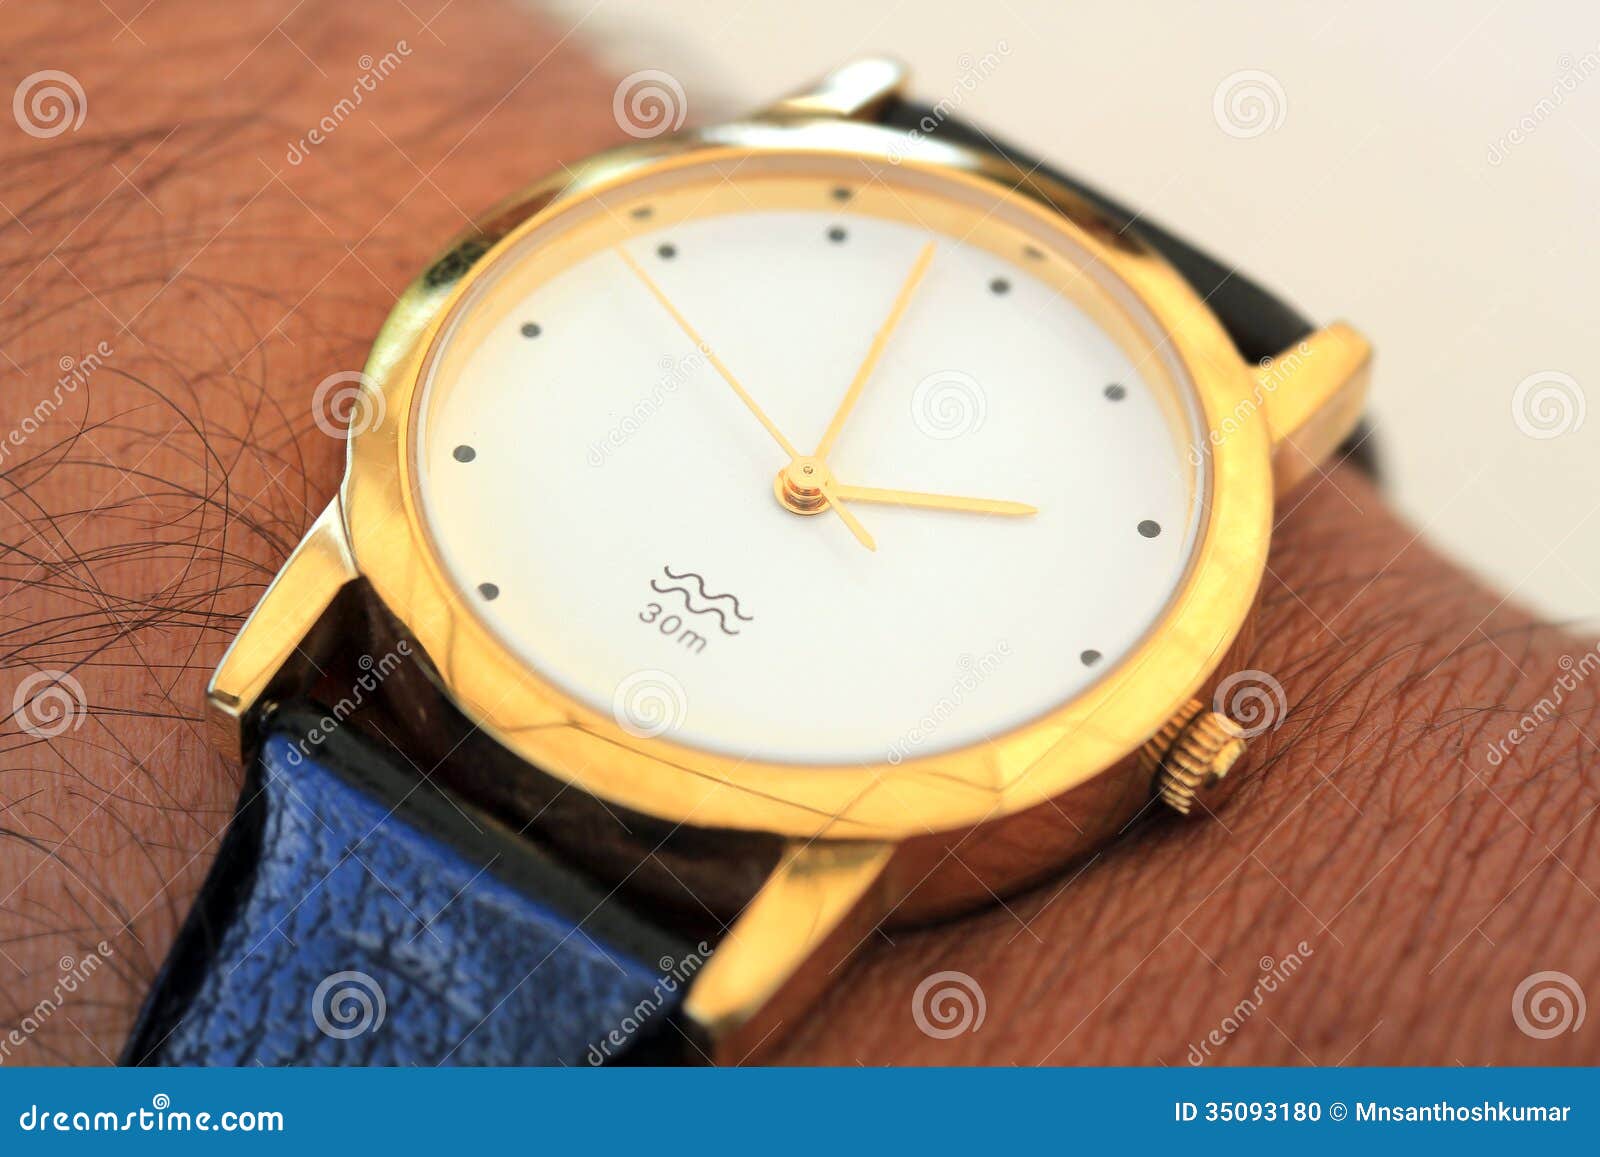 Golden Modern Wrist Watch Showing Time As 2pm Stock Photo - Image of ...